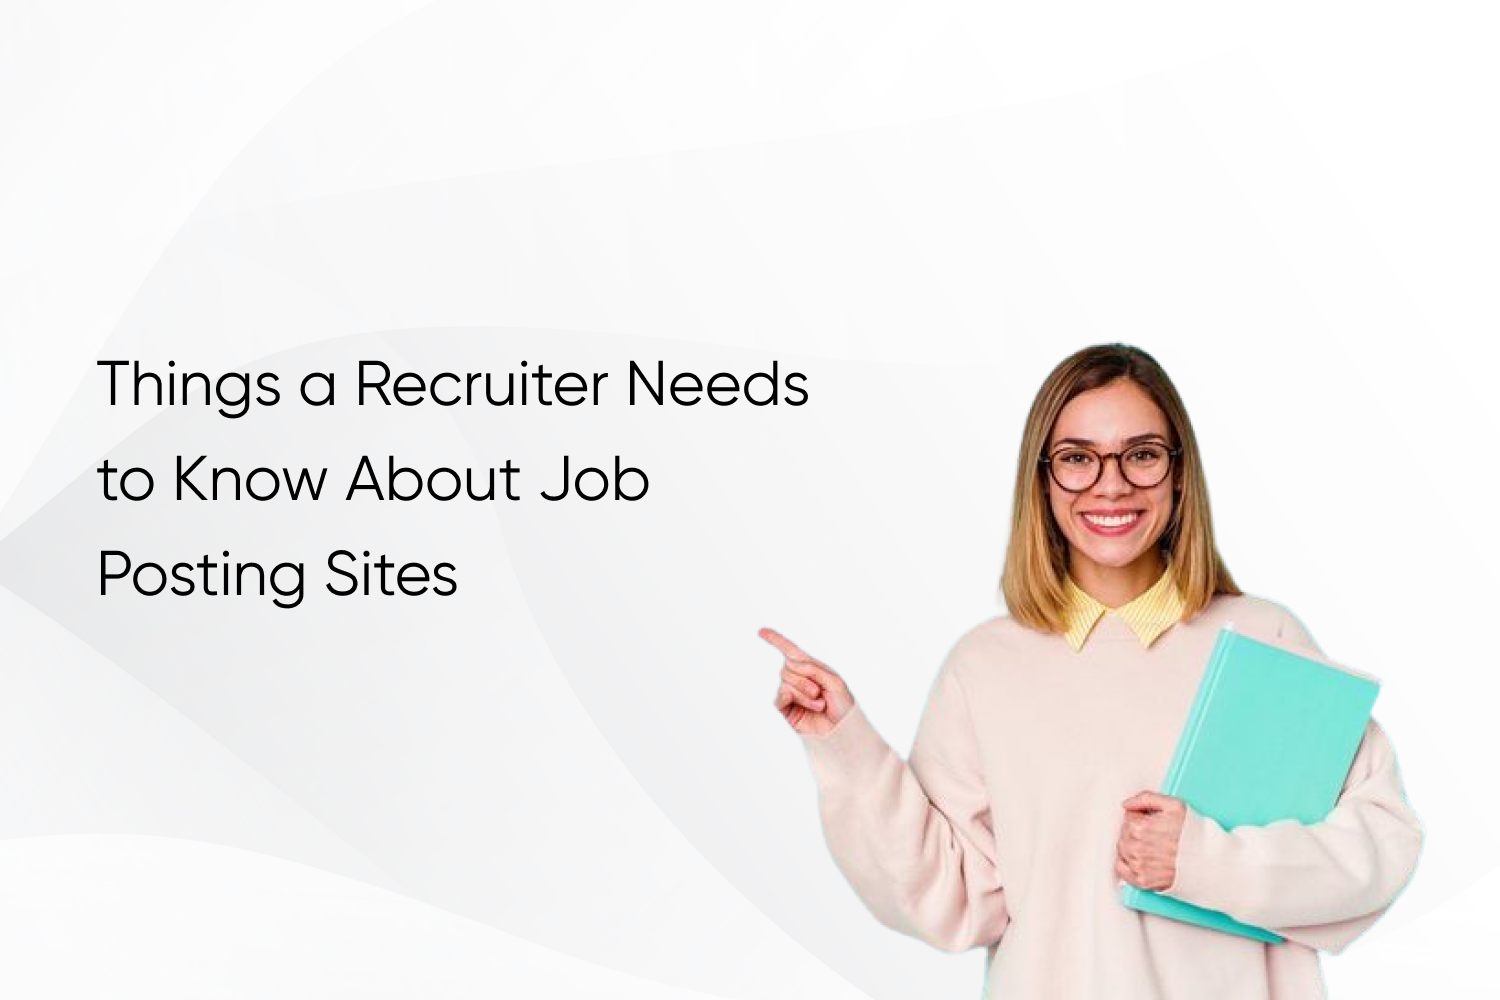 Things a Recruiter Needs to Know About Job Posting Sites